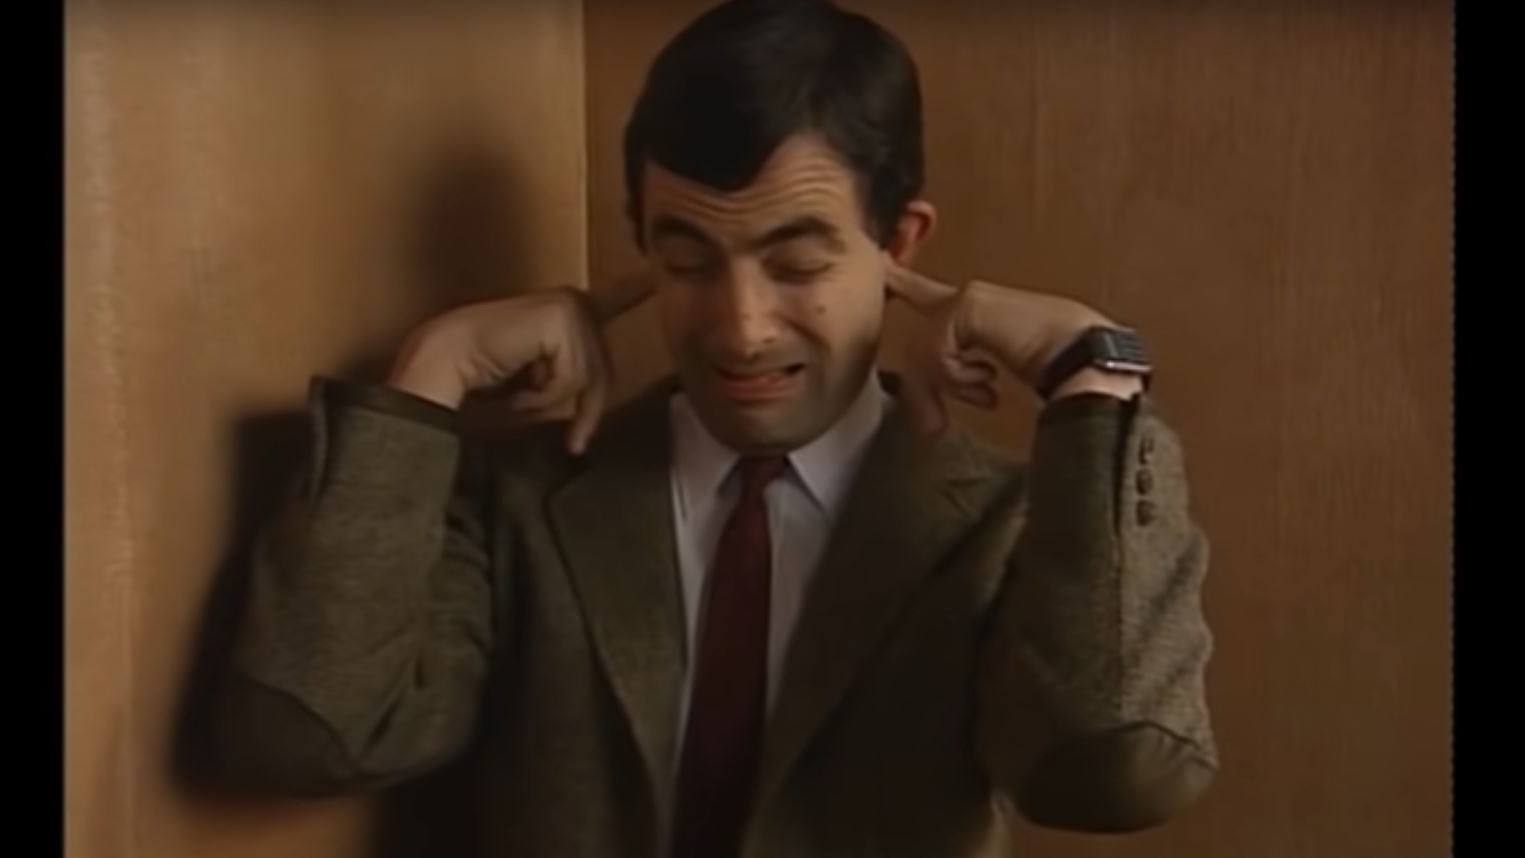 Mr Bean with his fingers in his ears